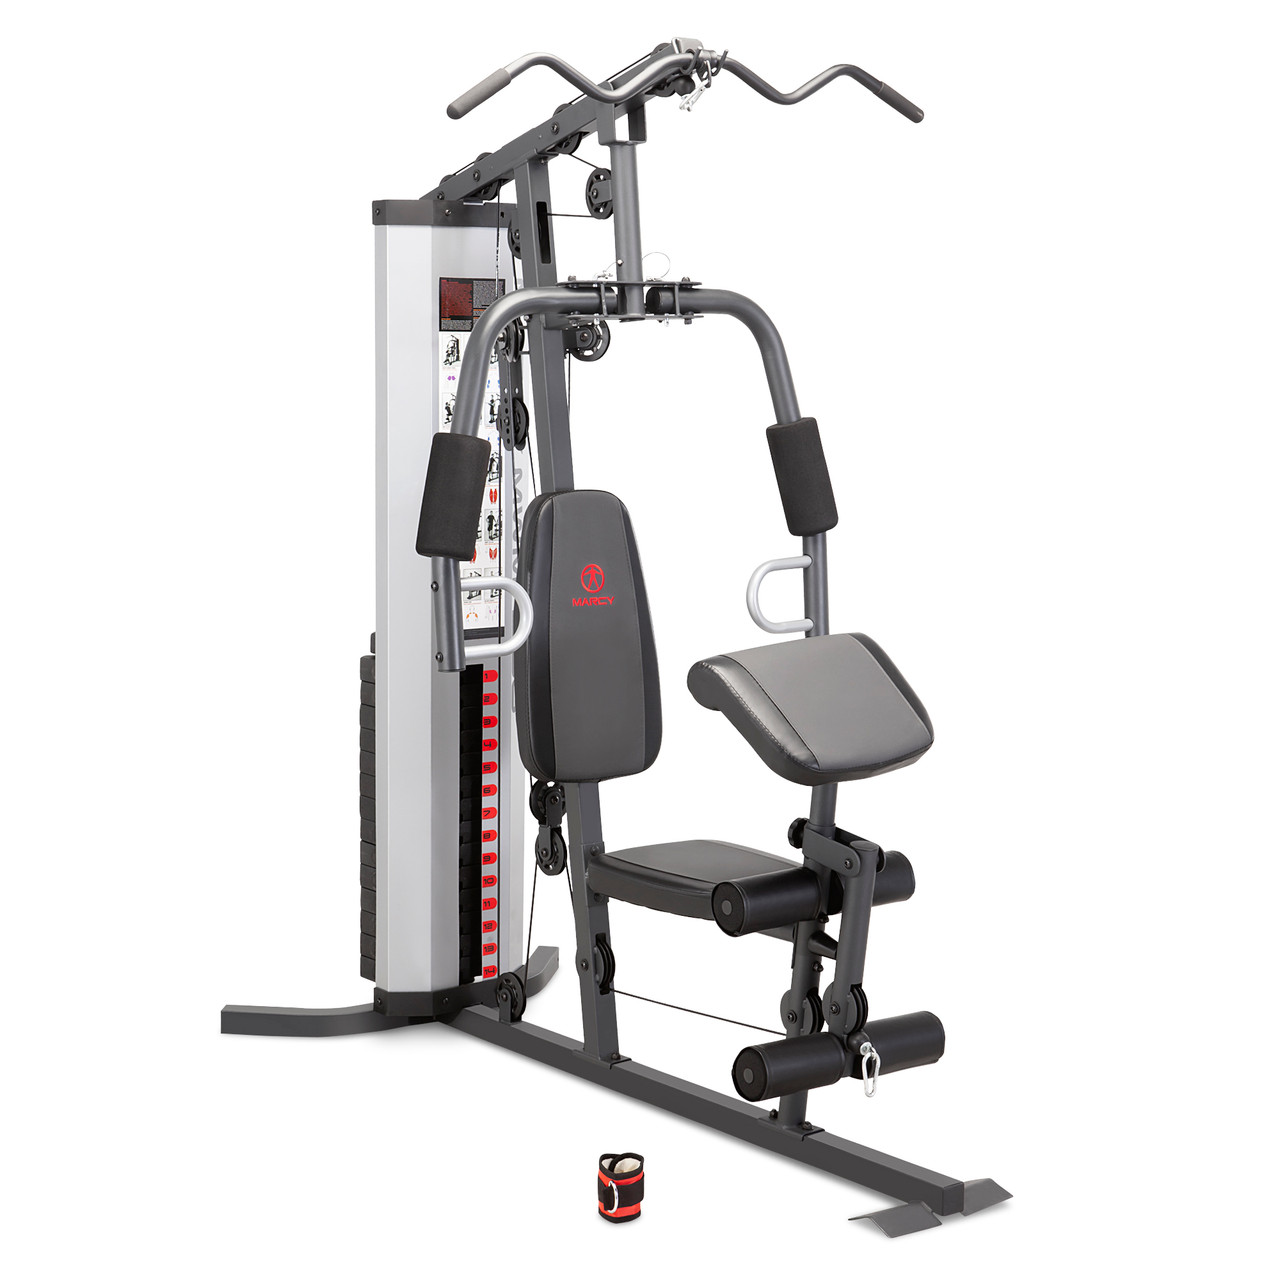 https://cdn11.bigcommerce.com/s-r2fl439k1s/images/stencil/1280x1280/products/138/2152/Marcy_Home_Gym_System_150lb_Weight_Stack_Machine_MWM-988__97260.1677714781.jpg?c=2